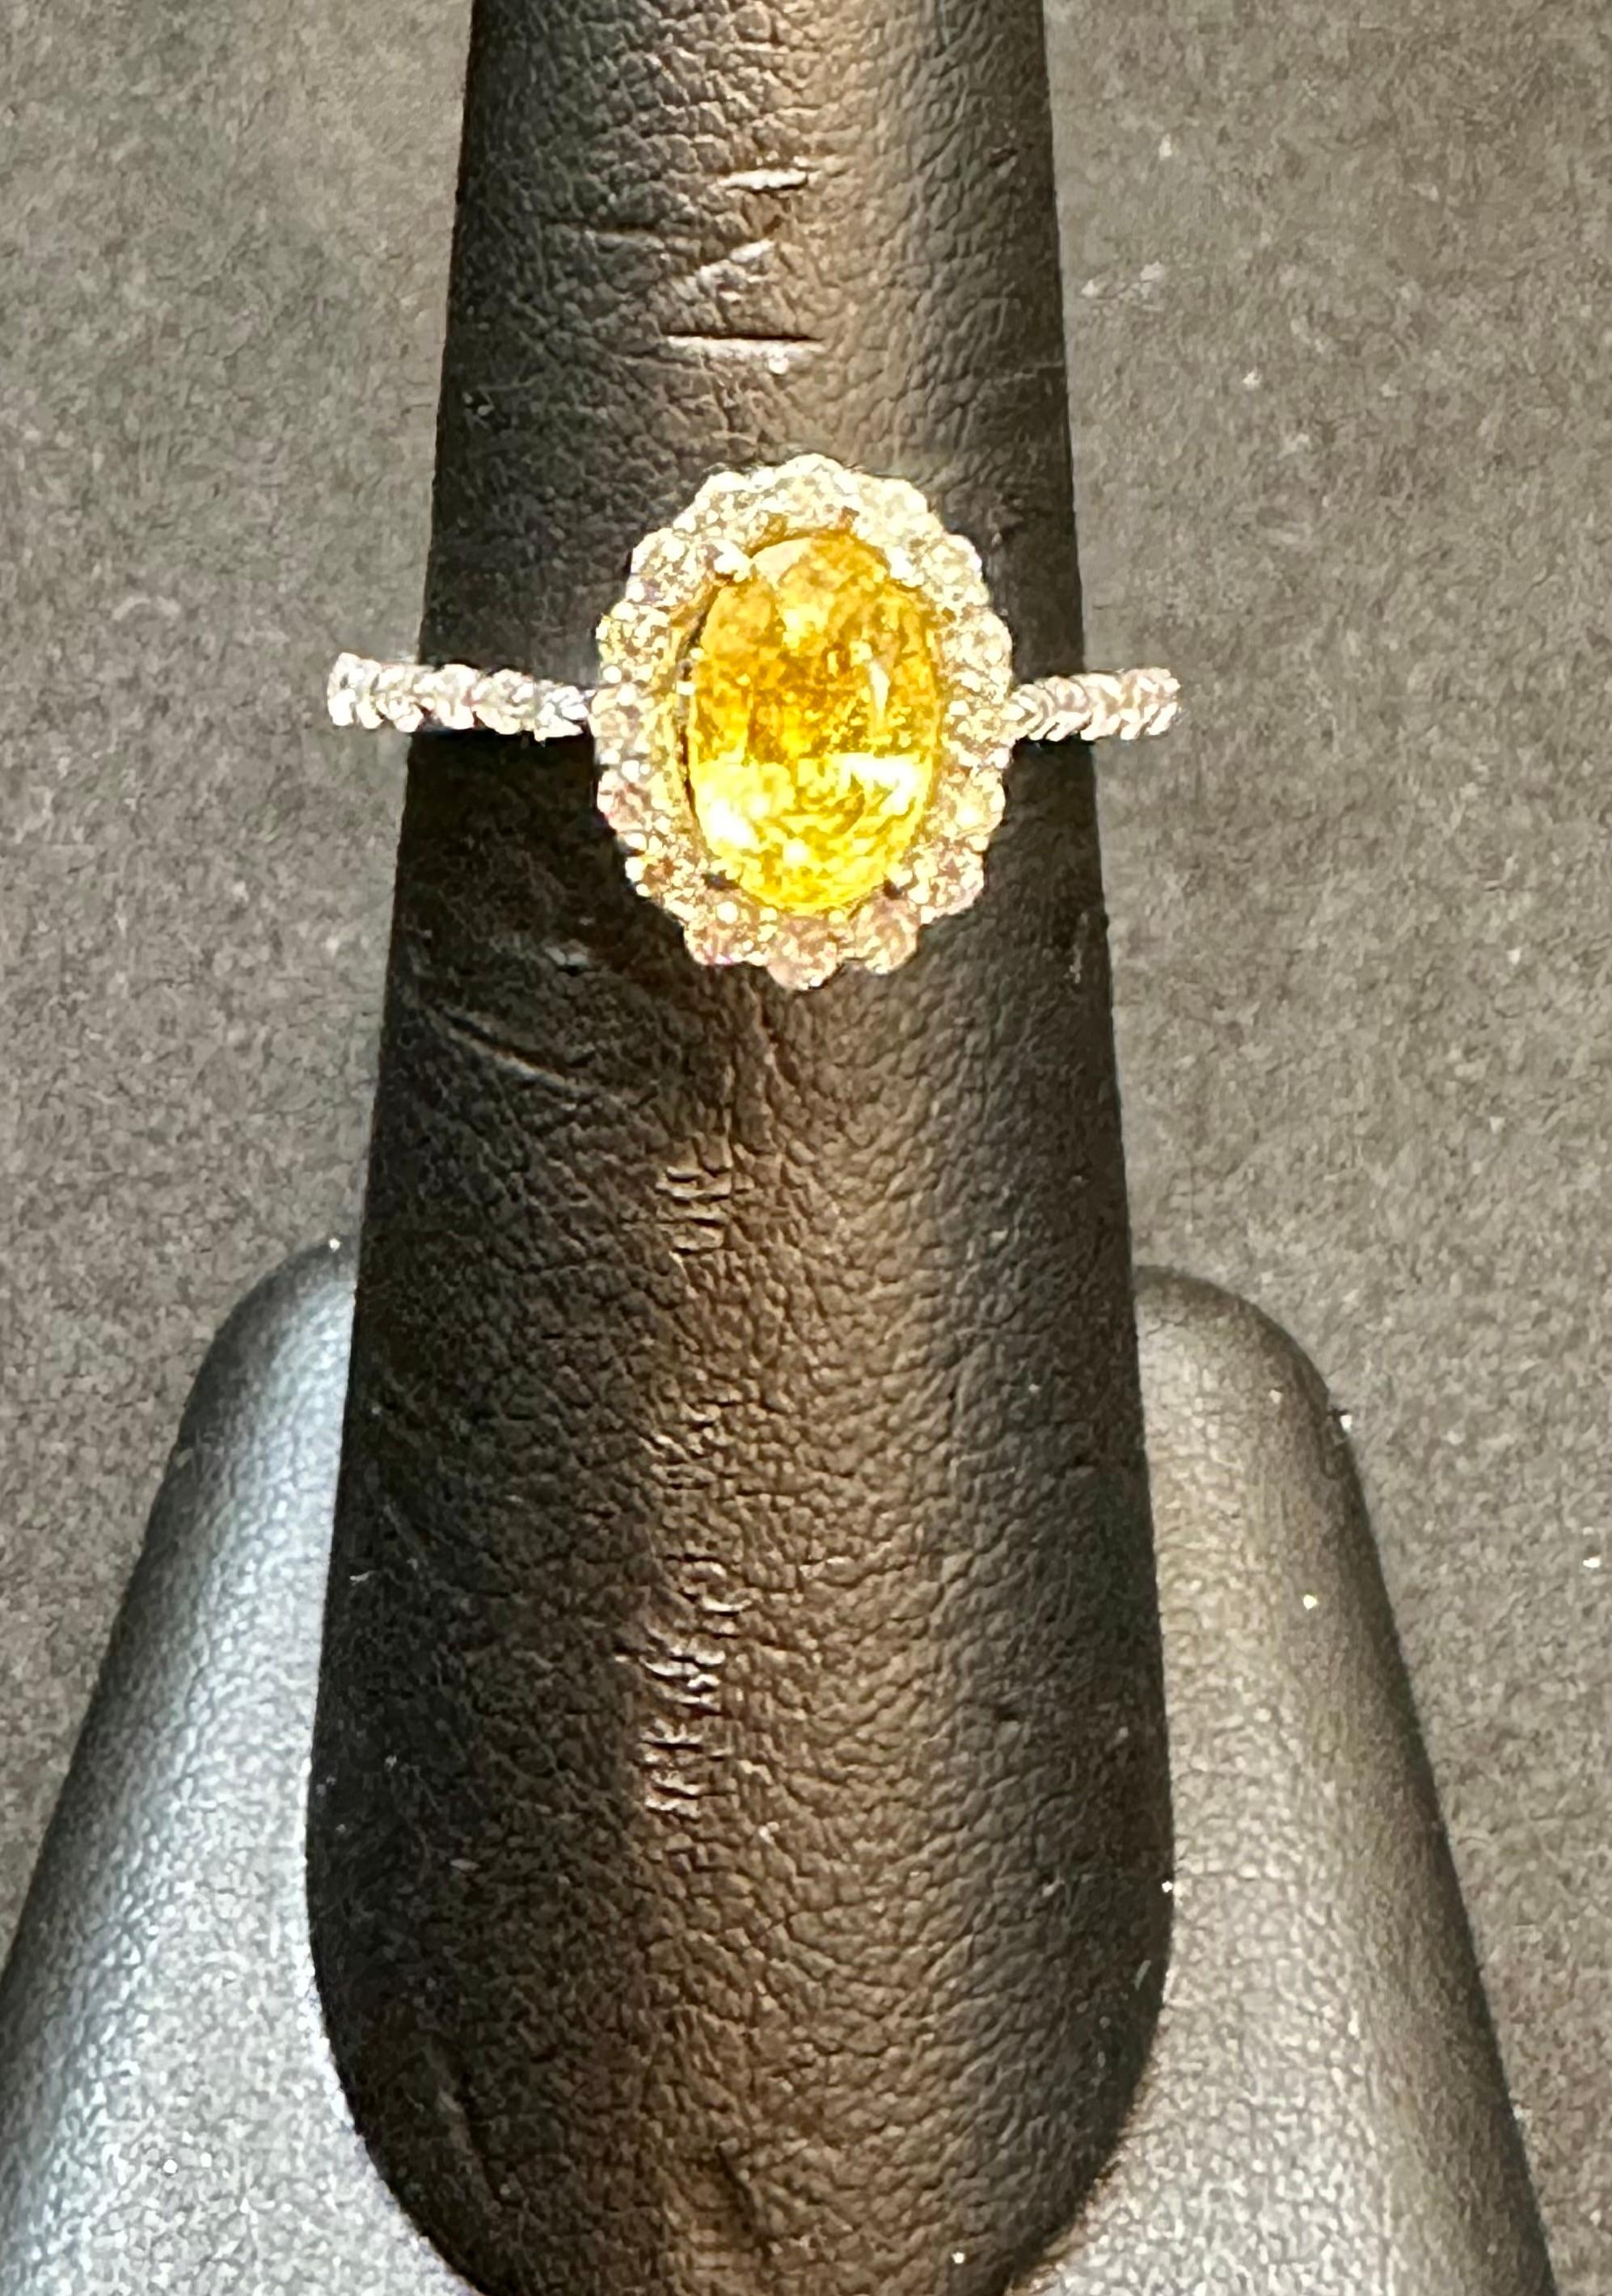 2.2 Ct Oval Cut Natural Yellow Sapphire & 1 Ct Natural Diamond Halo Engagement Ring Size 7 in 14 K white Gold
Introducing a truly stunning piece, behold the 2.2 Carat Oval Natural Yellow Sapphire  & 1 Ct Diamond Ring in exquisite 14 Karat White